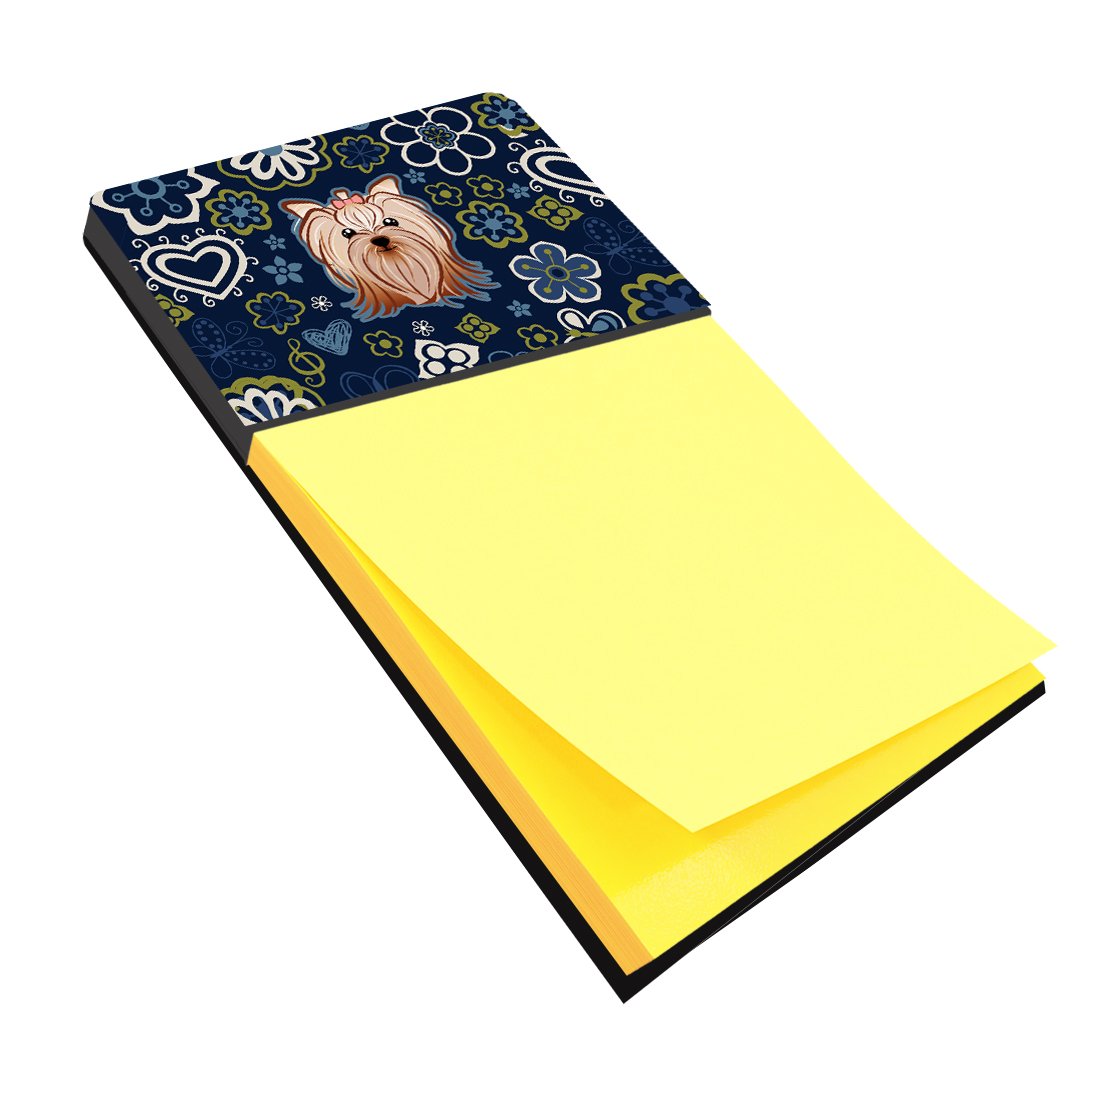 Blue Flowers Yorkie Yorkishire Terrier Sticky Note Holder BB5055SN by Caroline's Treasures